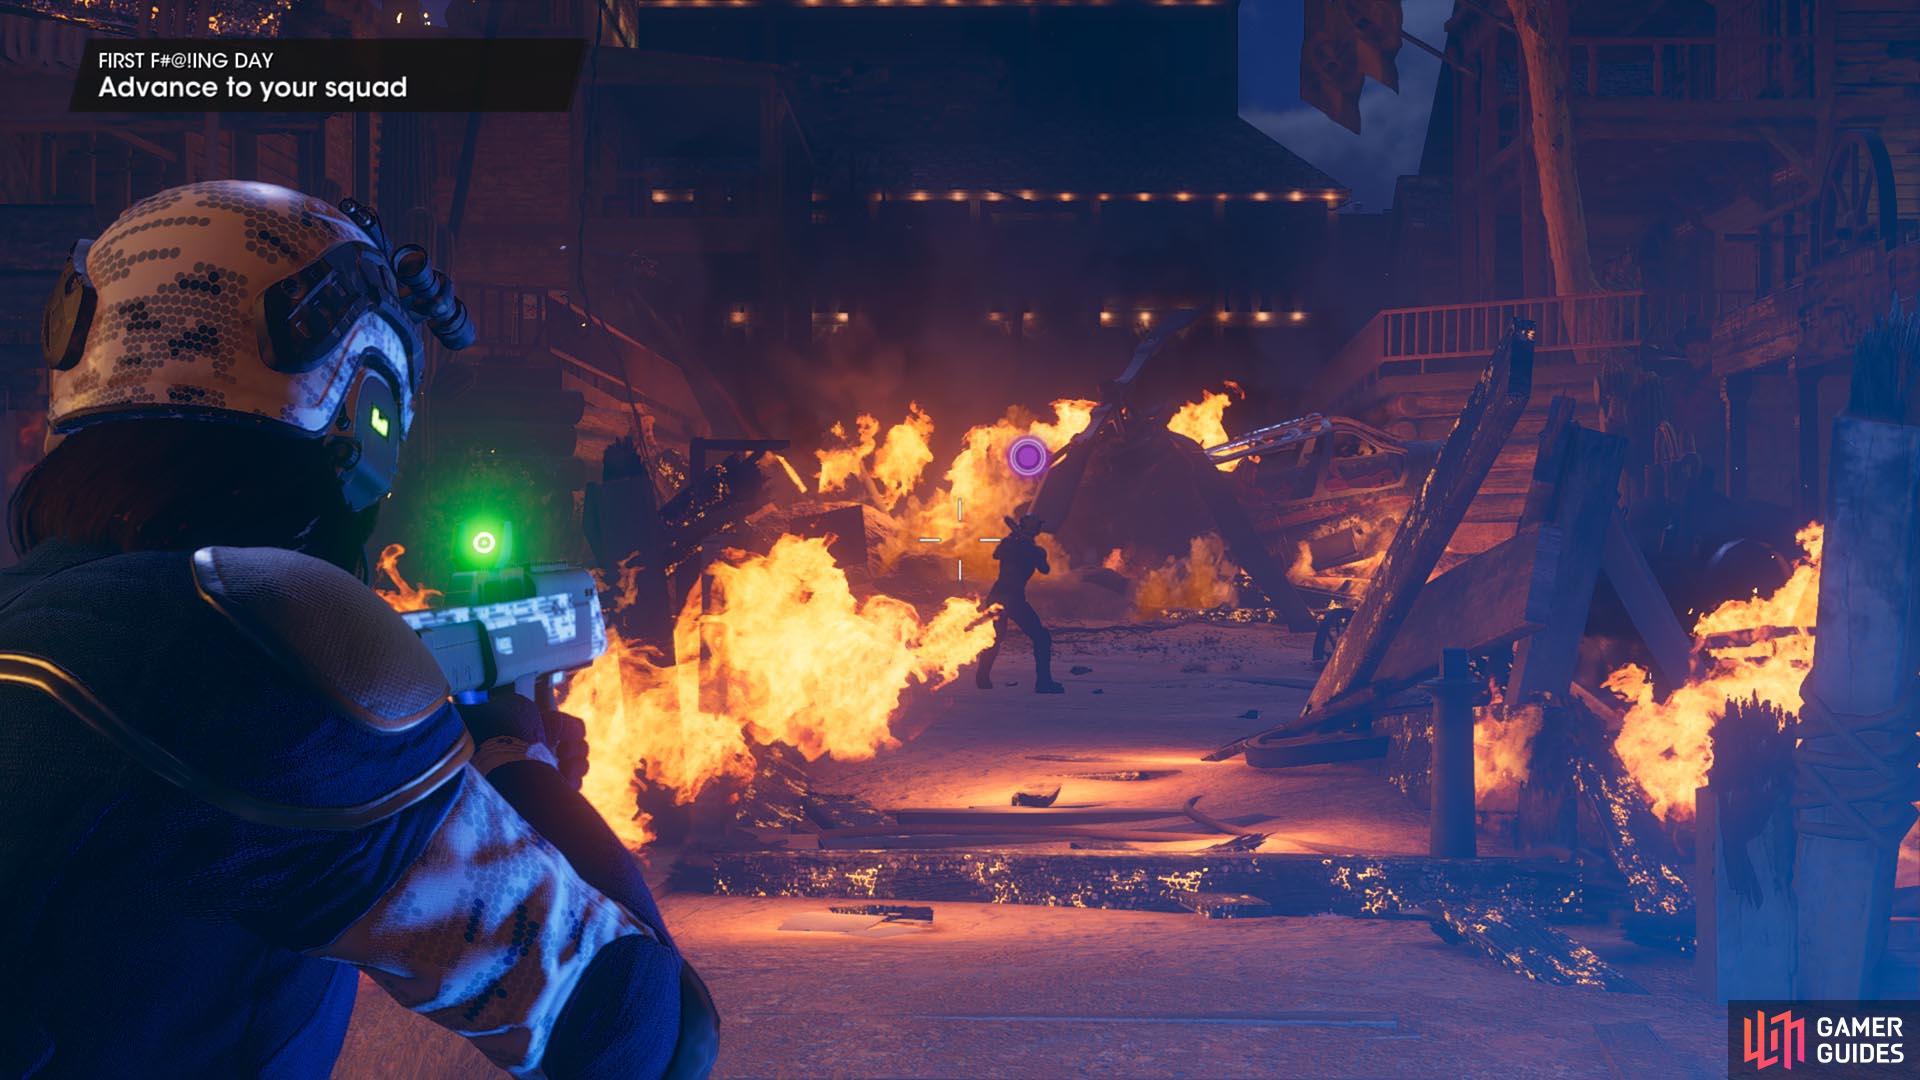 Ooh, pretty fire. You will be seeing a lot of that in Saints Row’s first mission.